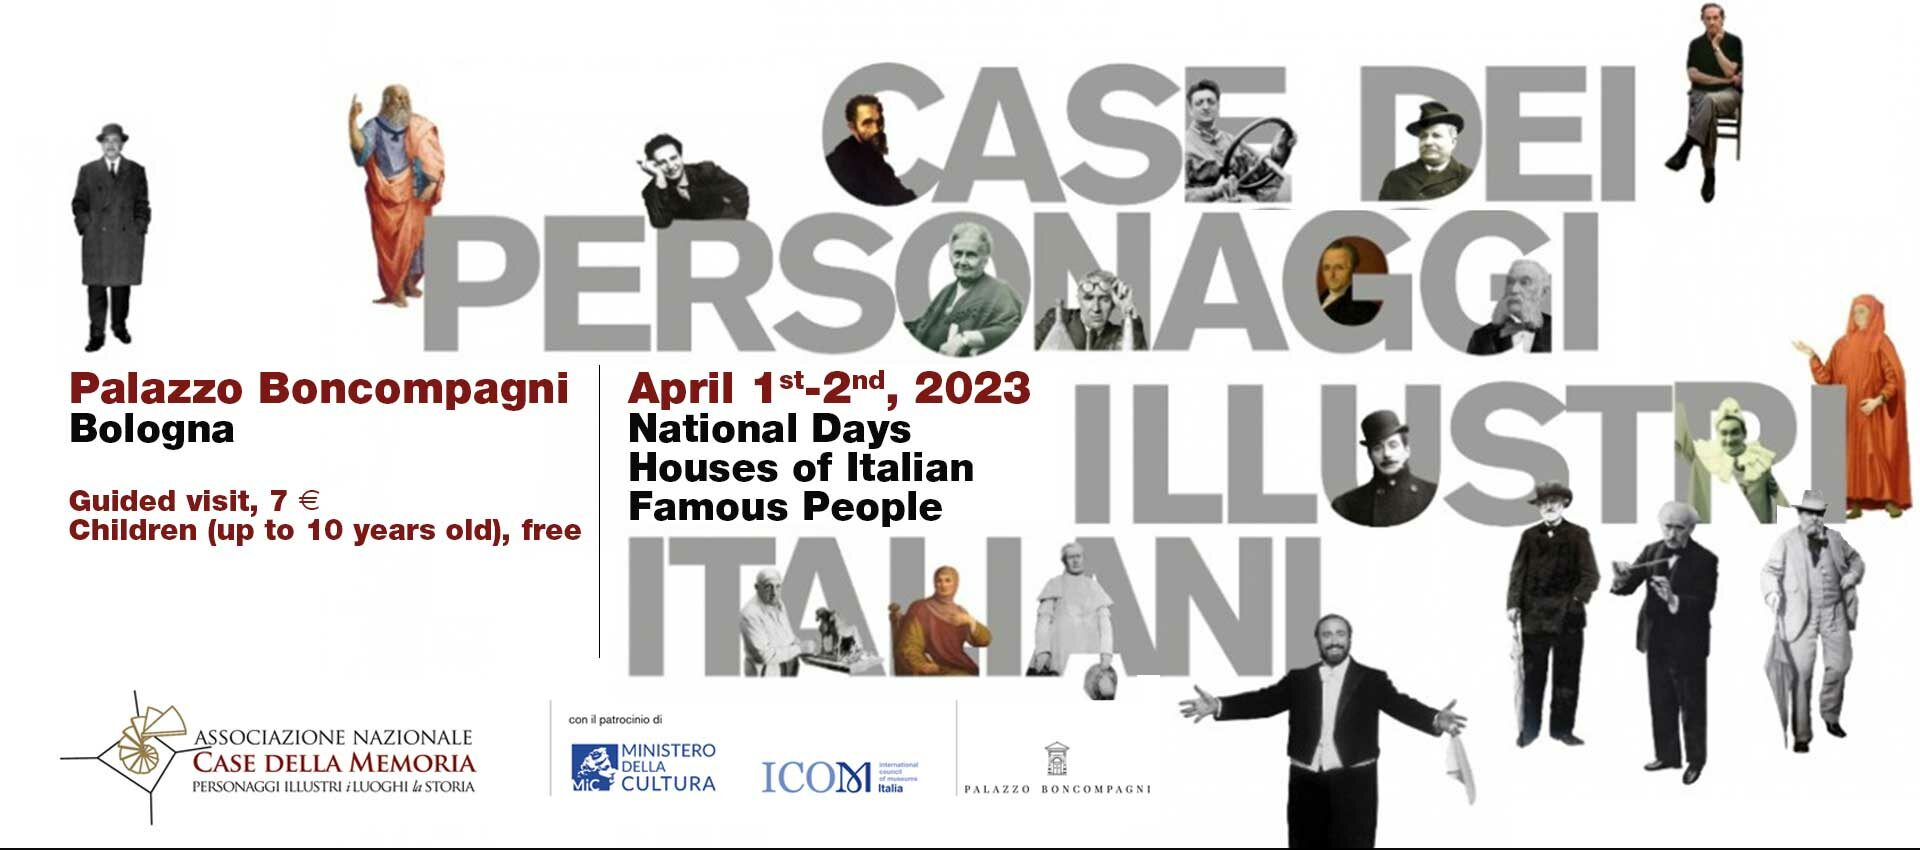 <p>April 1st and 2nd, 2023</p>
<h2>National Days &#8220;Houses of Italian Famous People&#8221;</h2>
<h3>Visit Palazzo Boncompagni at a reduced cost! </h3>
